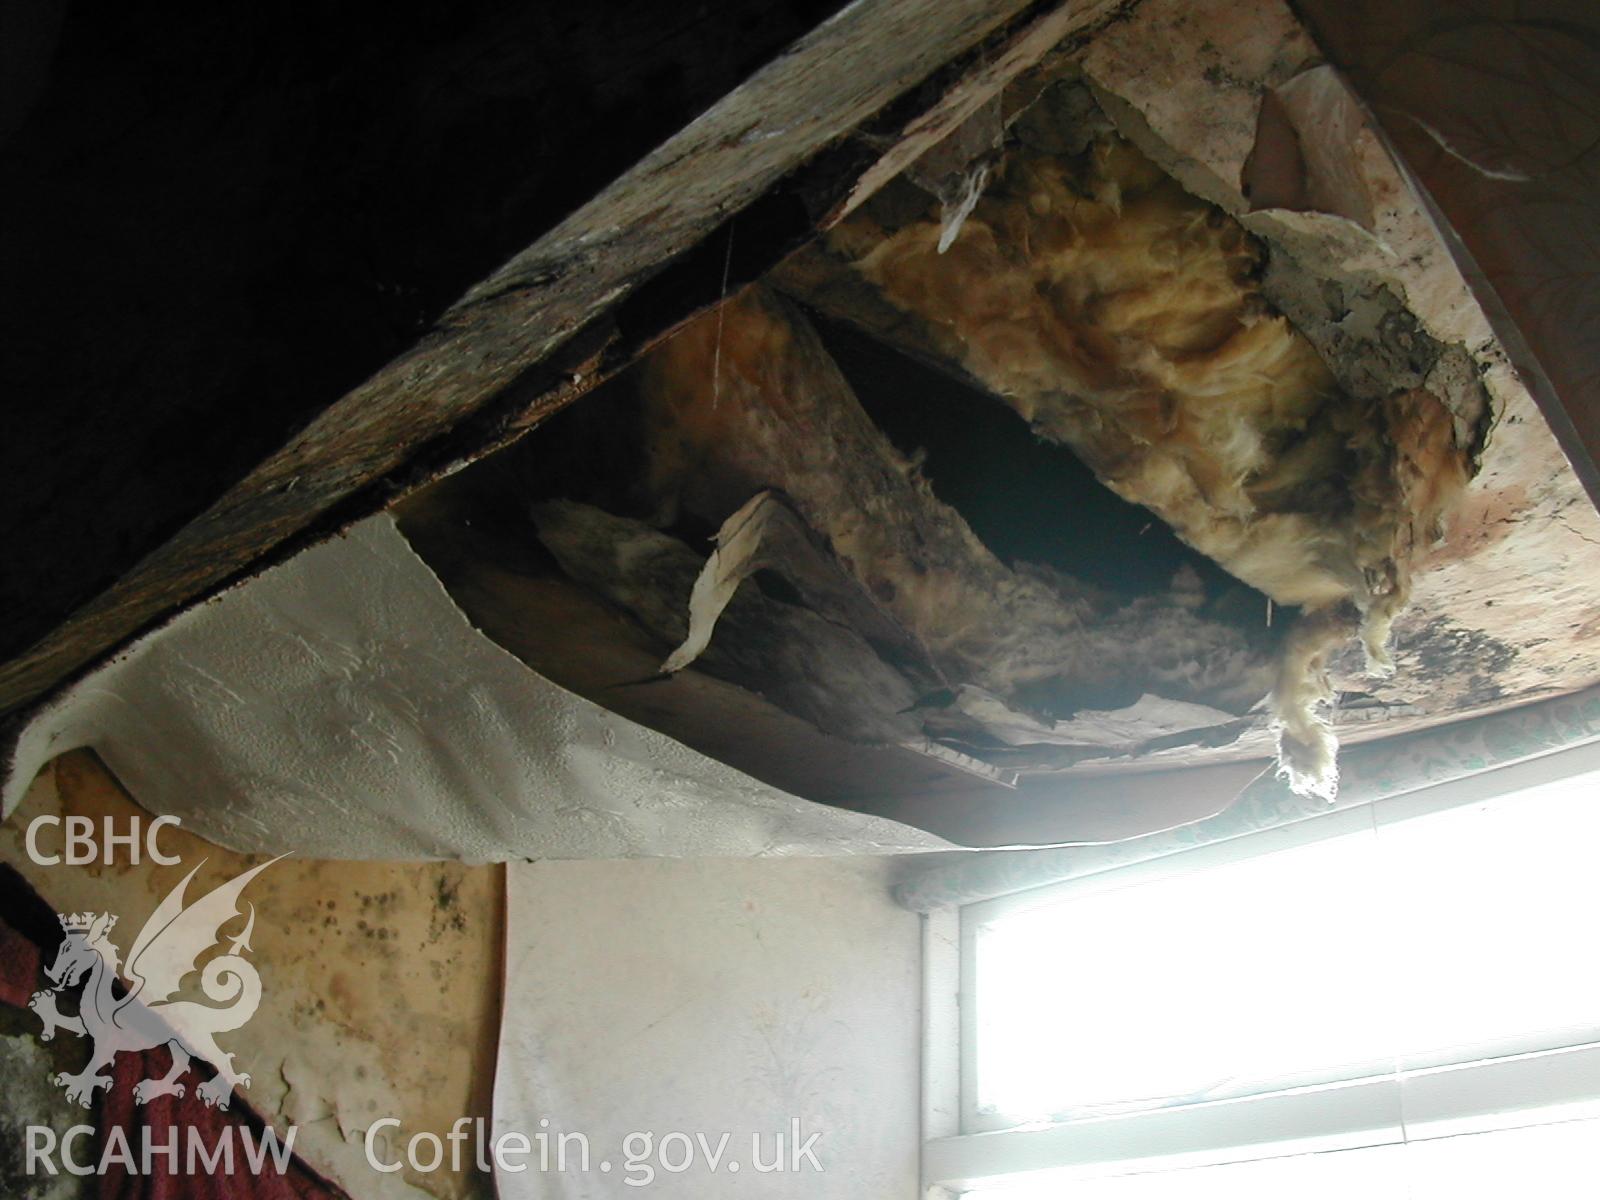 Colour photograph showing detailed interior view of damaged ceiling in Rosacre, Gronant, Prestatyn. Unknown date. Donated by the Conservation Department of Flintshire County Council, in advance of relocation to new offices.